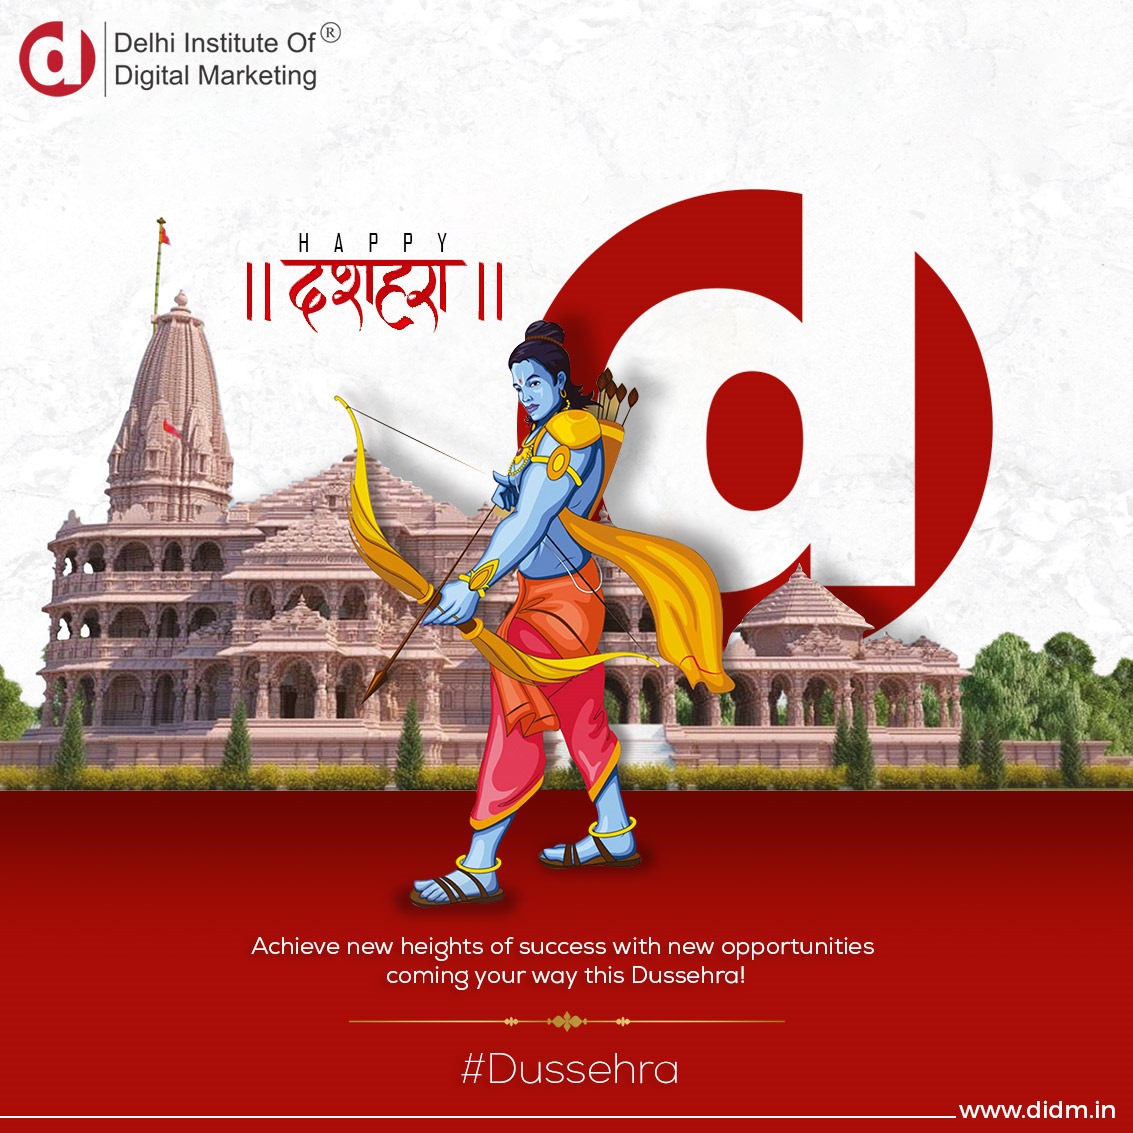 The DIDM Family wishes you a very Happy Dussehra